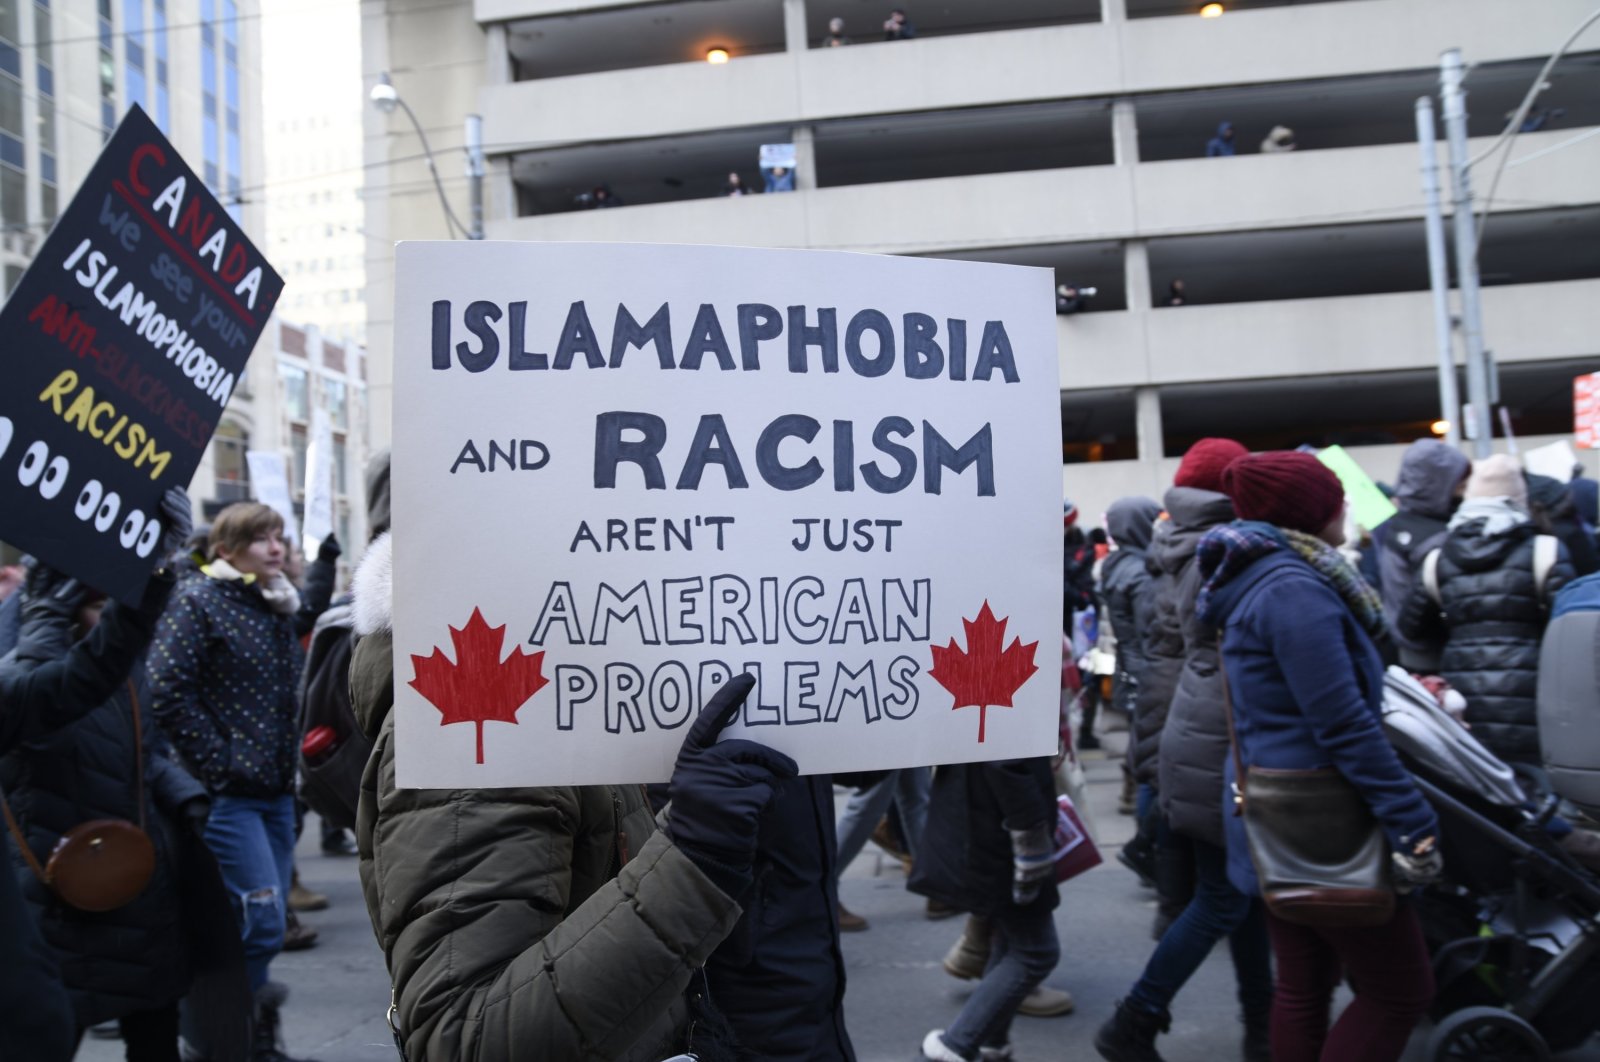 People with posters rejecting racism and Islamophobia during a rally in Toronto, Canada, Feb. 4, 2017. (Shutterstock File Photo)